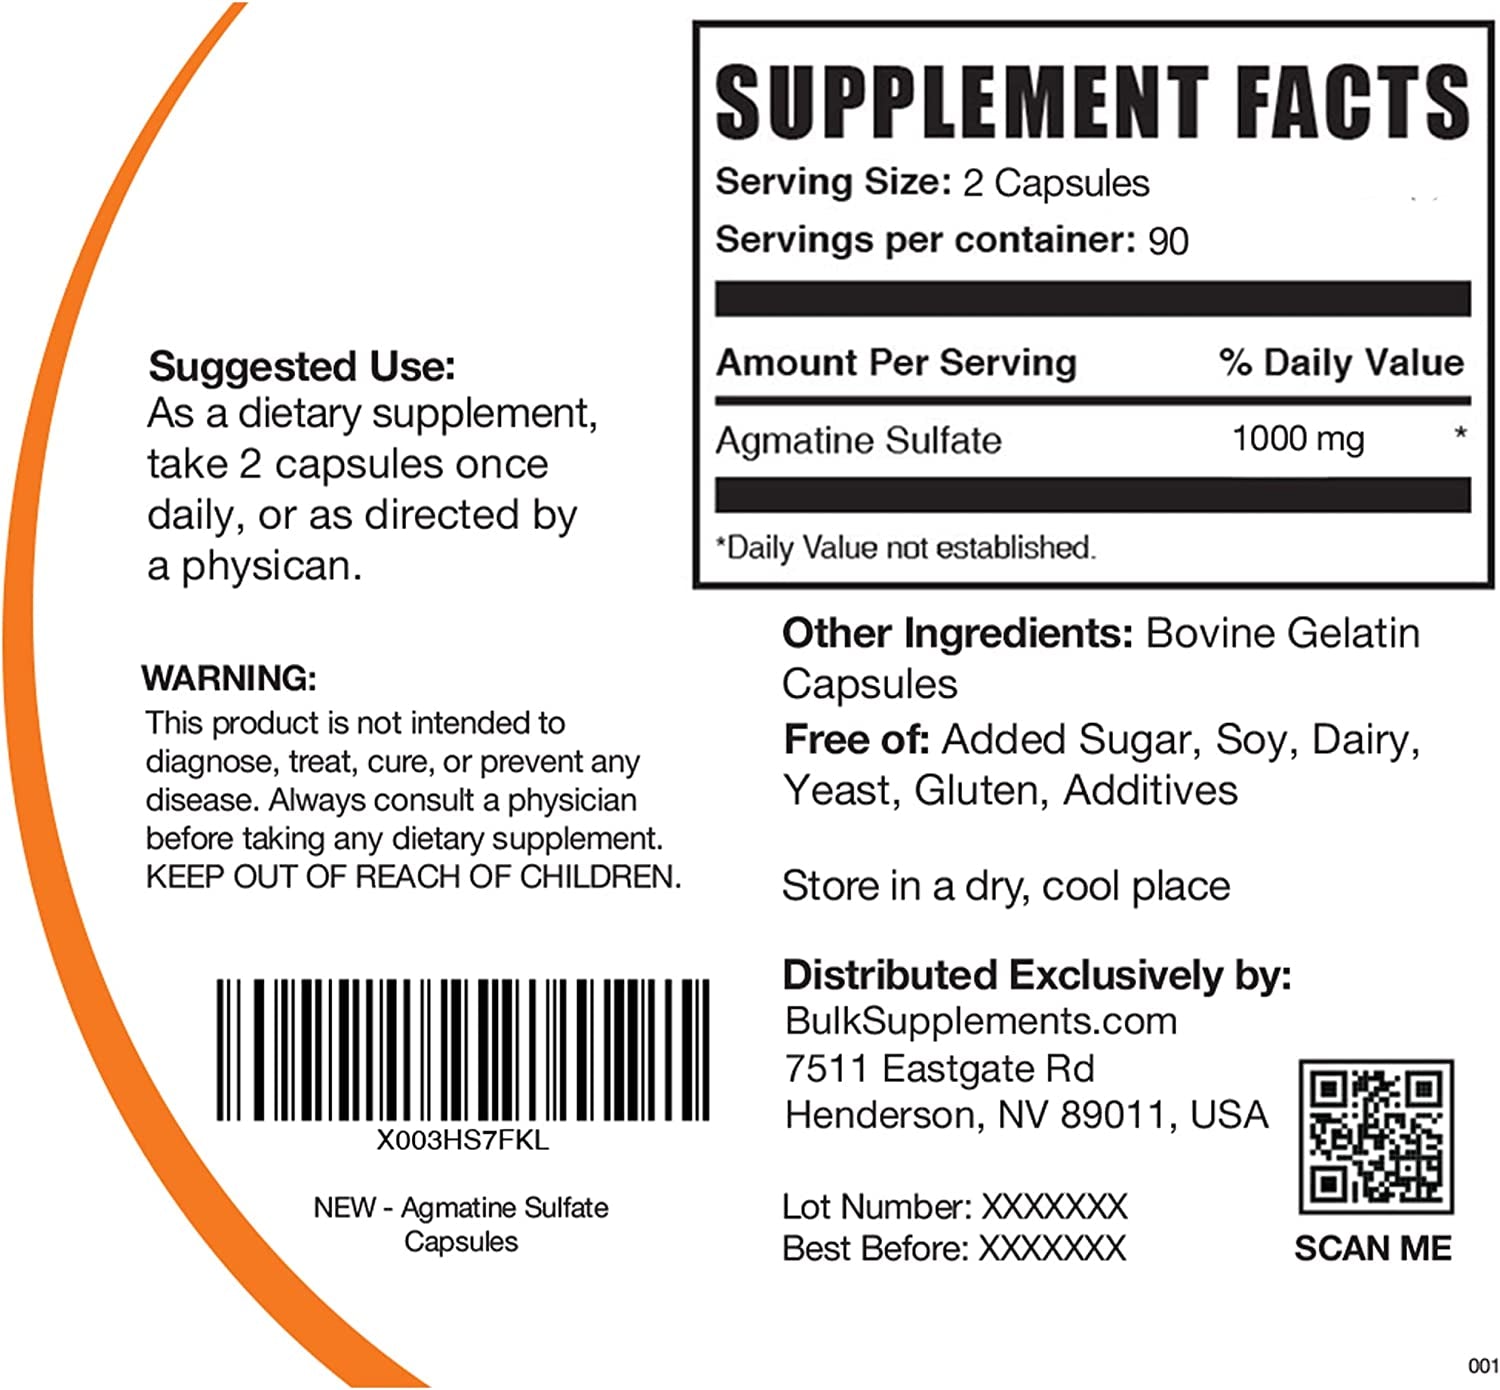 BULKSUPPLEMENTS.COM Agmatine Sulfate Capsules - Supplement for Nitric Oxide Production - Gluten Free - 1000Mg per Serving - 90-Day (3-Month) Supply (180 Capsules)